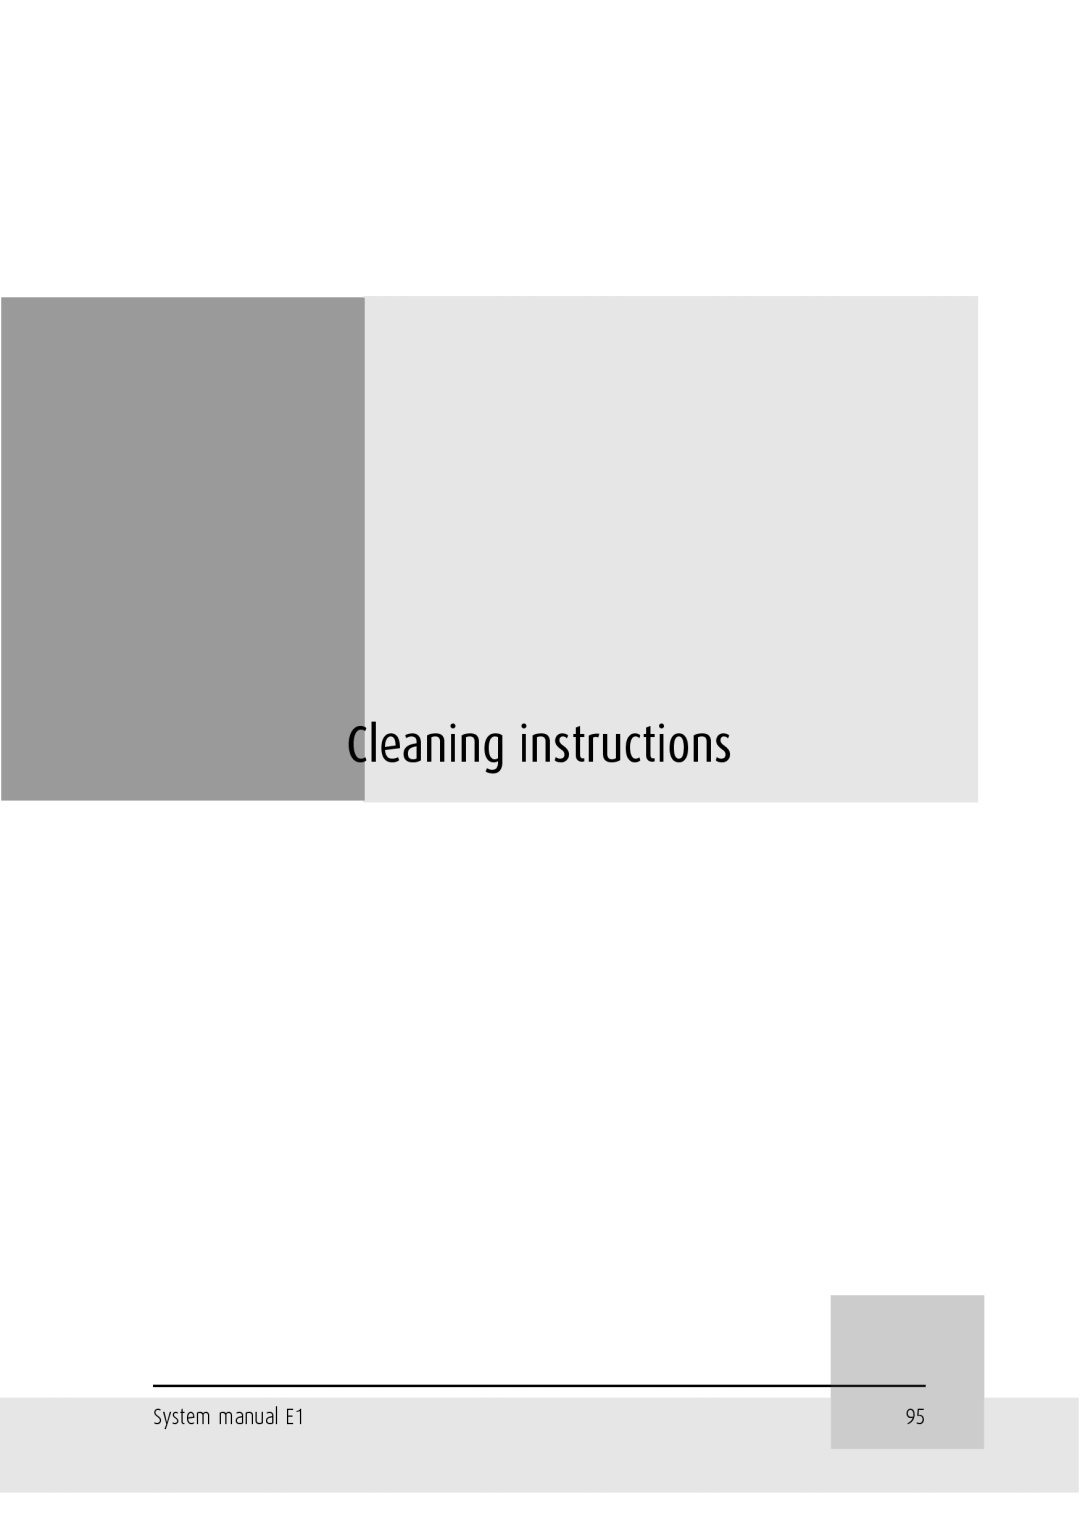 Barco Cleaning instructions, System manual E1 